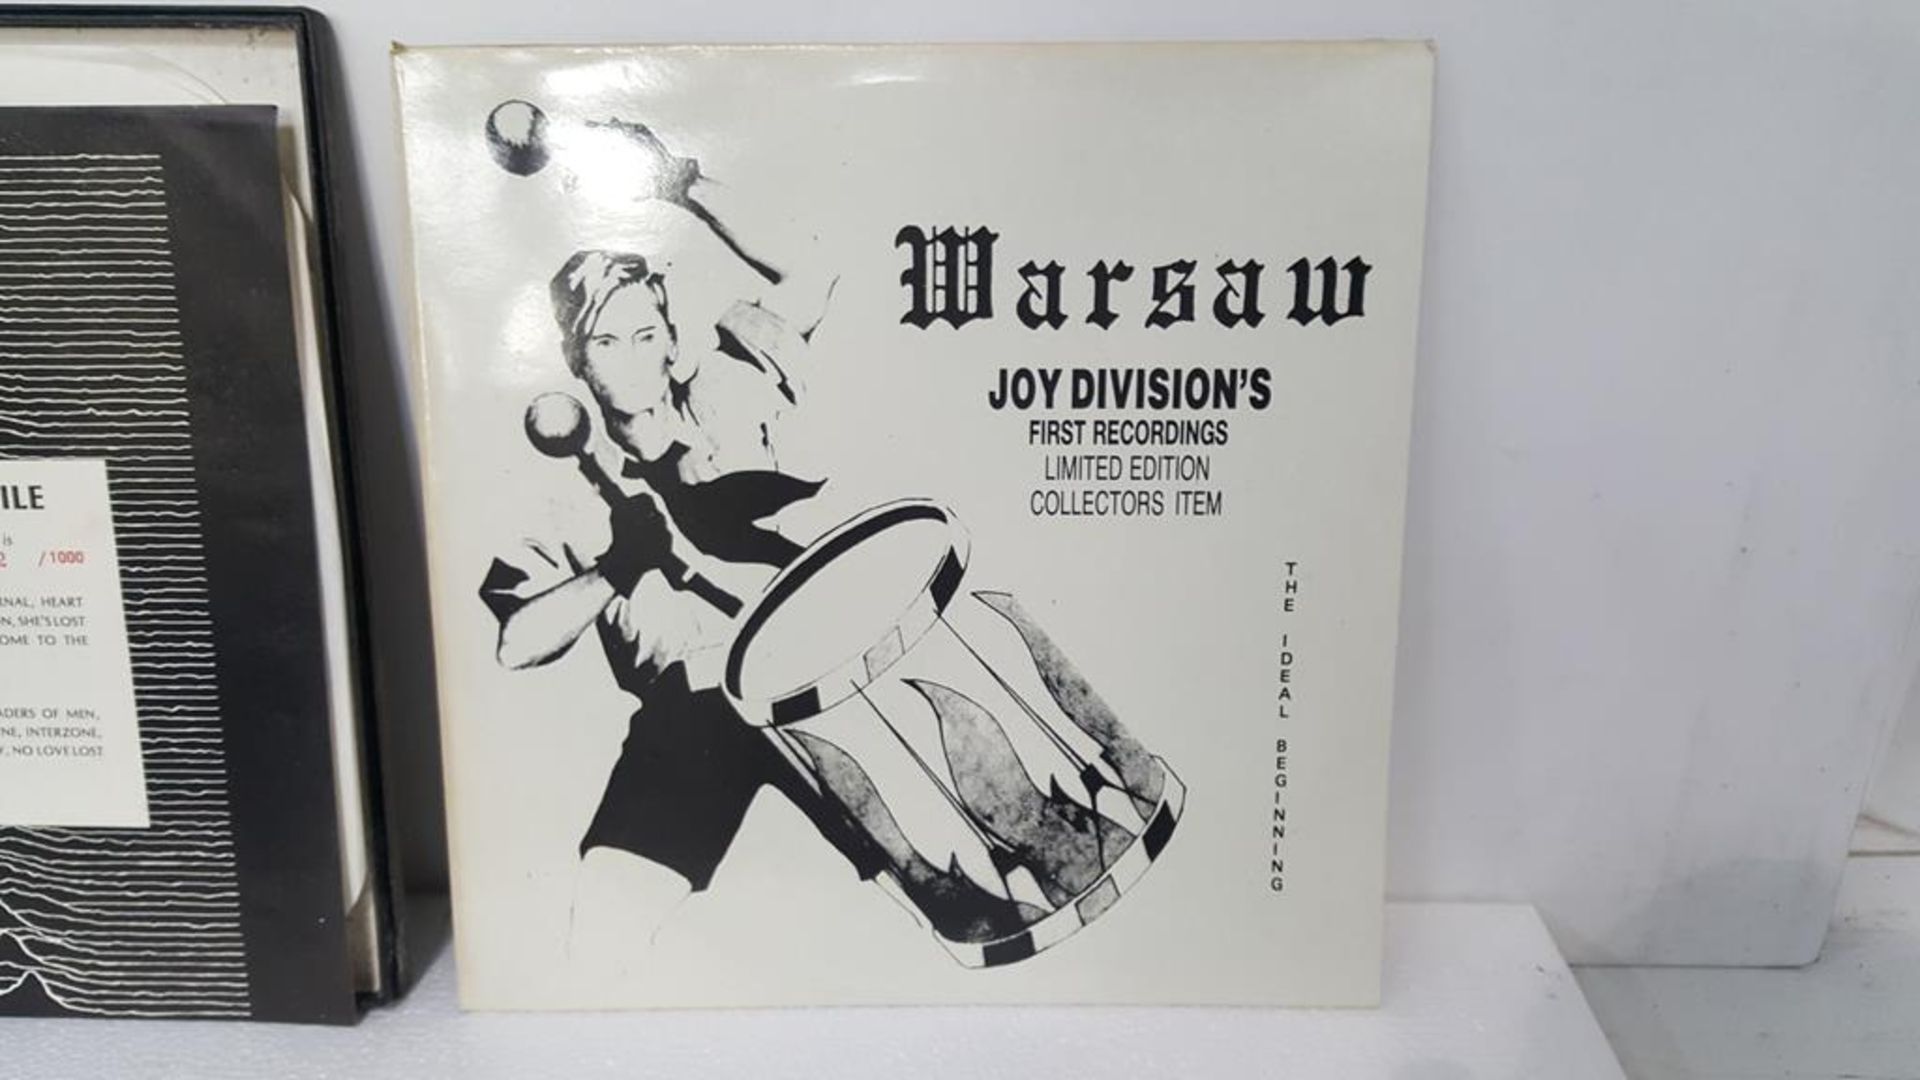 Joy Division First Recording Limited Edition Collectors together with Box File Special Collectors Ed - Image 2 of 7